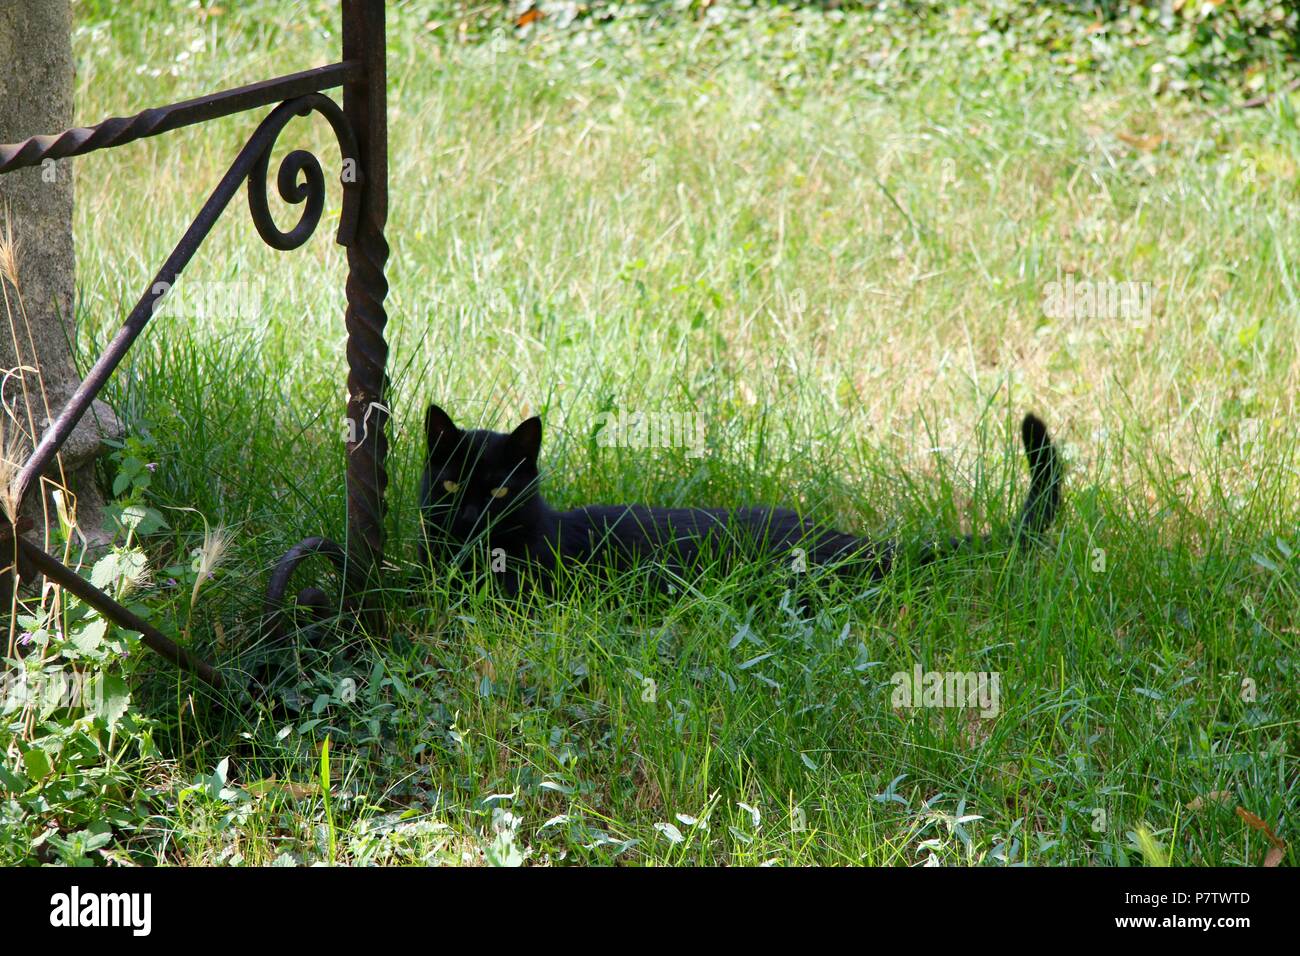 A black cat in a churchyard cemetery in Hungary Stock Photo